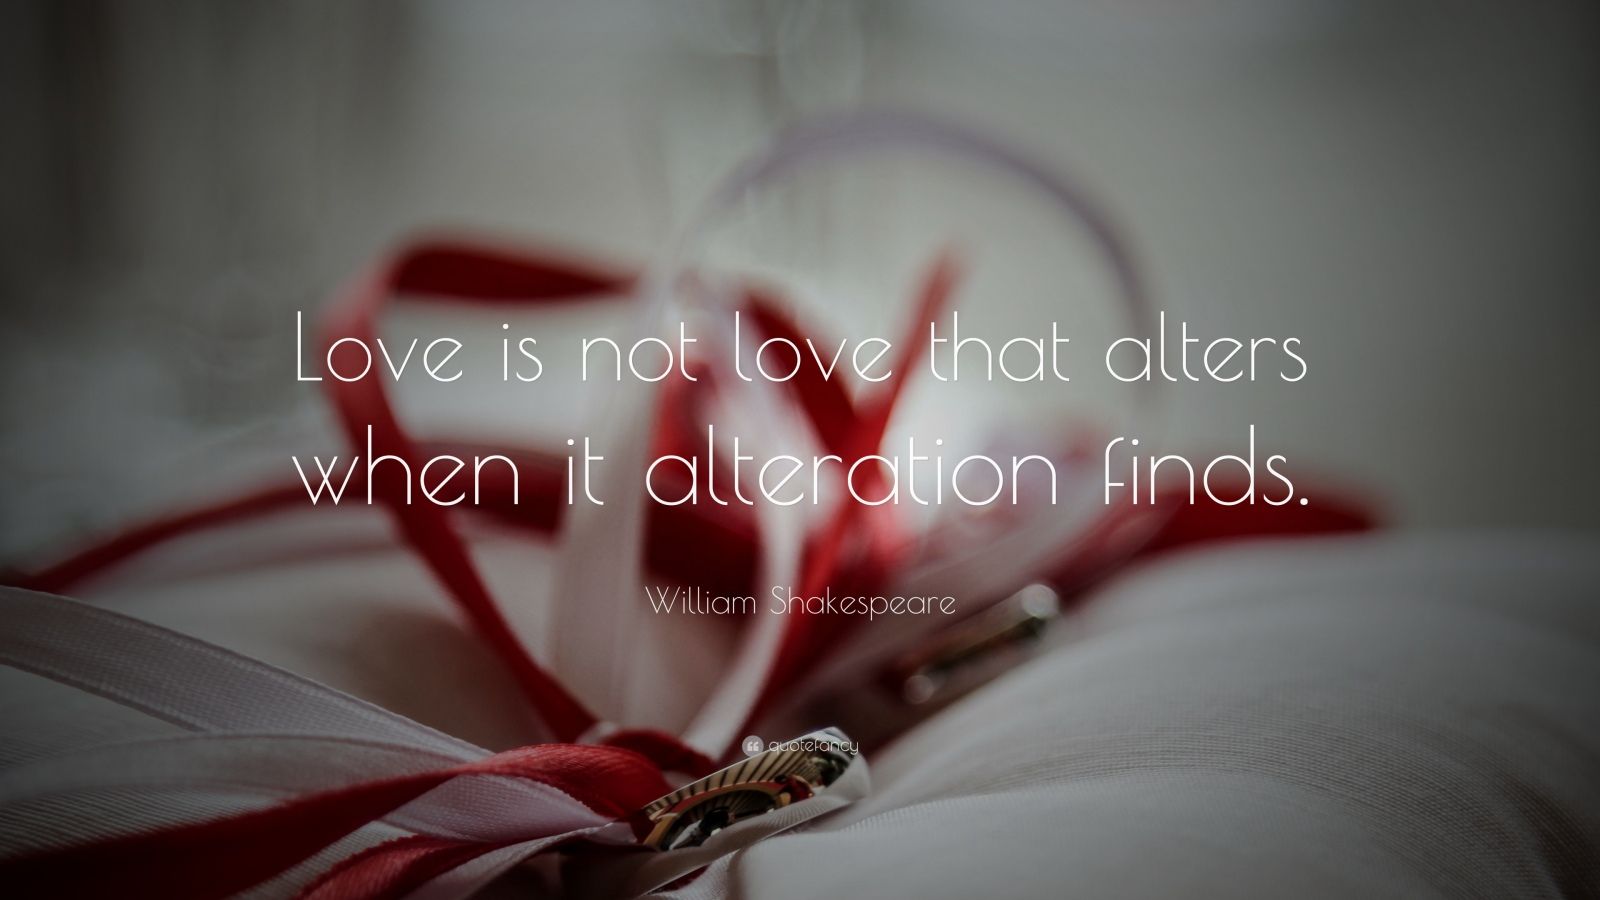 William Shakespeare Quote “Love is not love that alters when it alteration finds